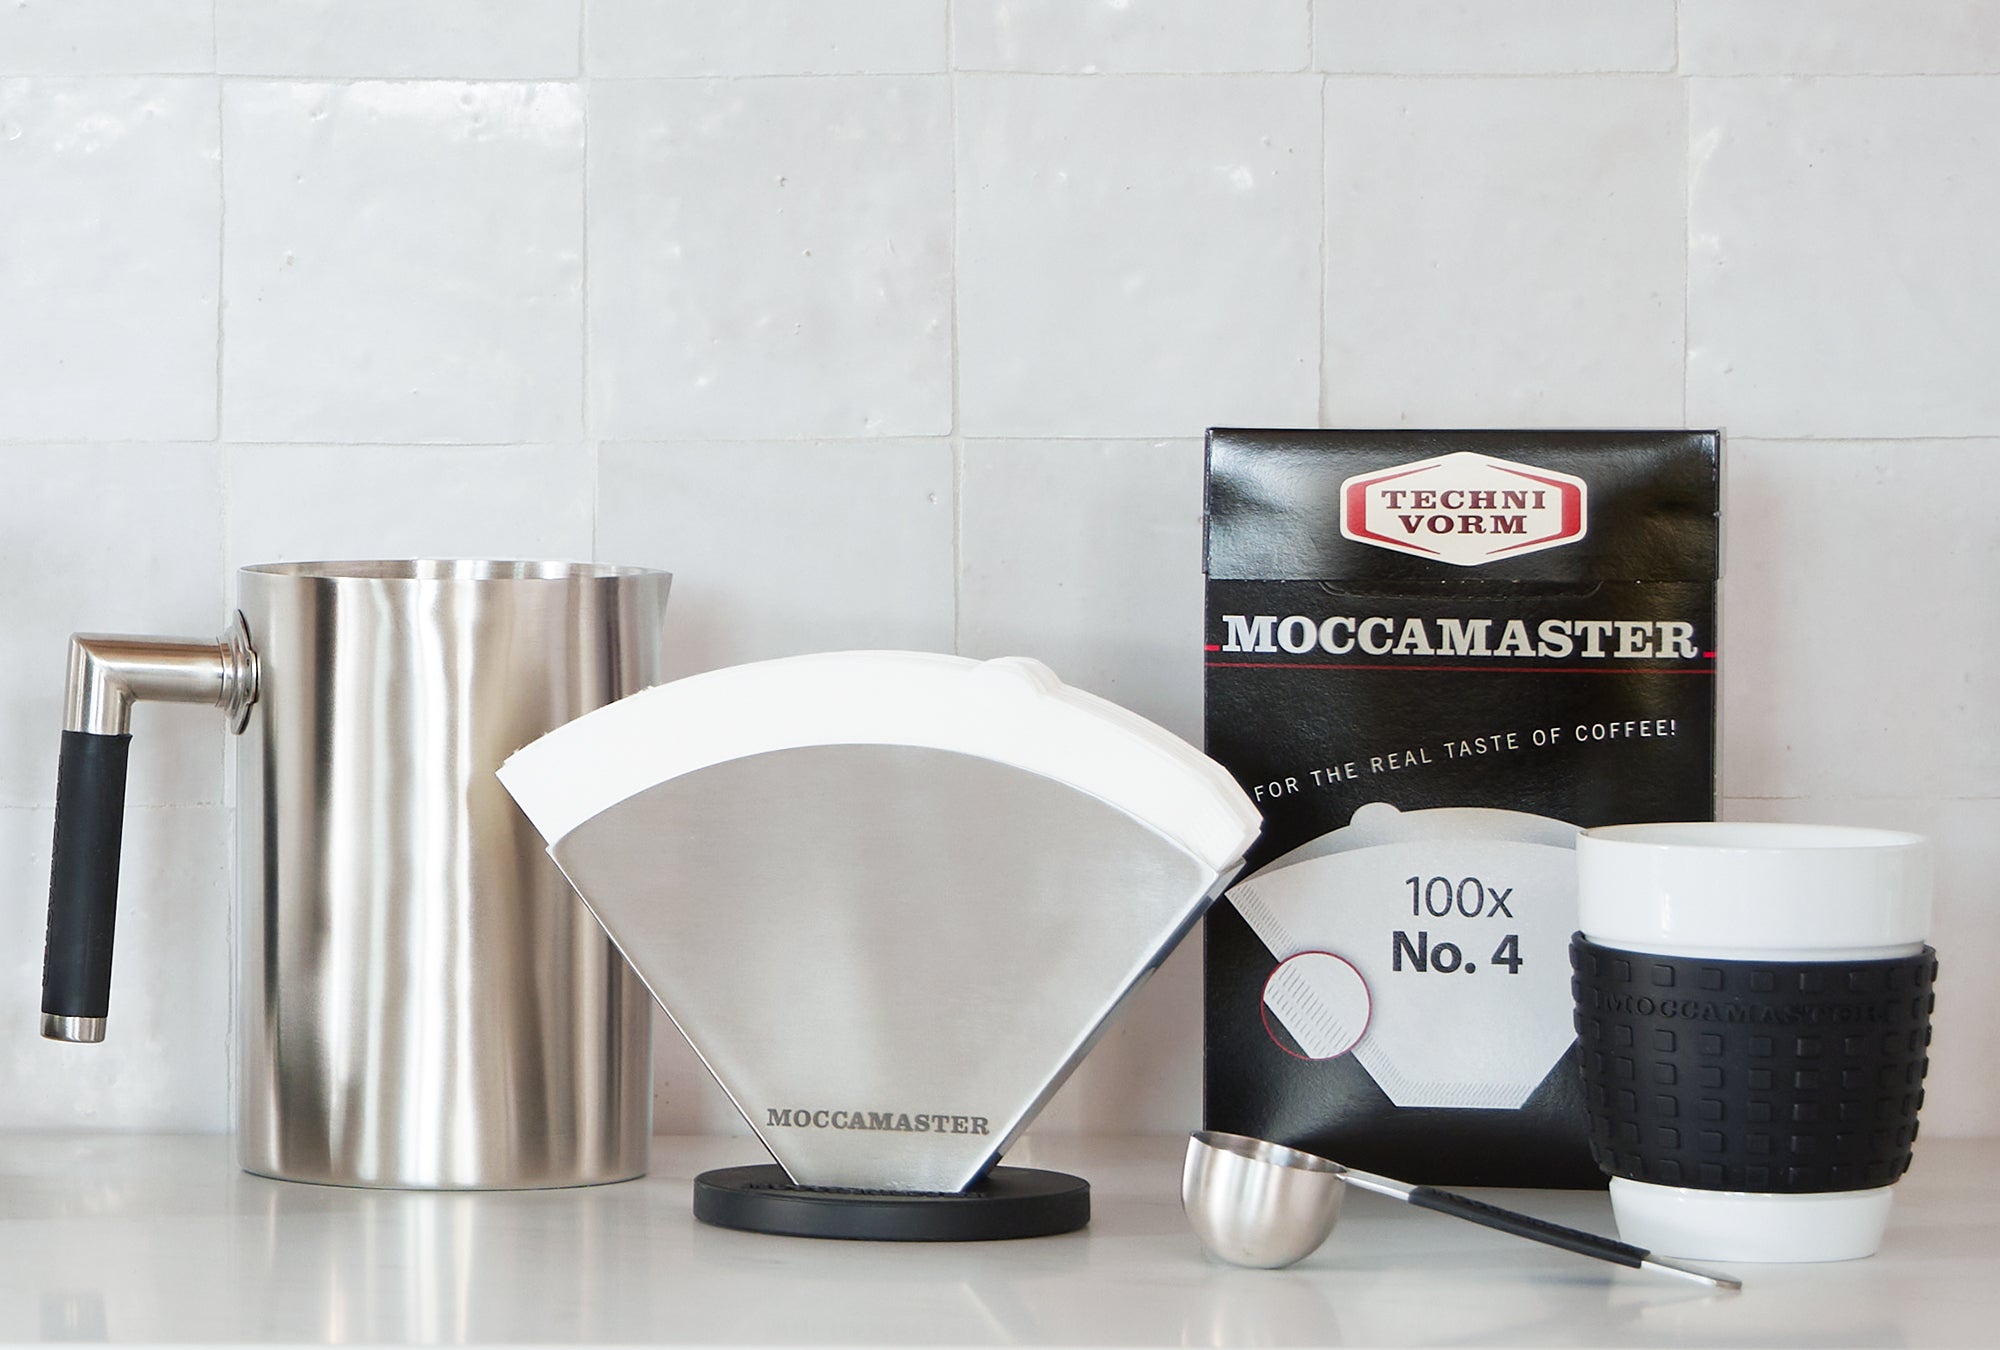 Image of Moccamaster accessories and filters on a kitchen counter.